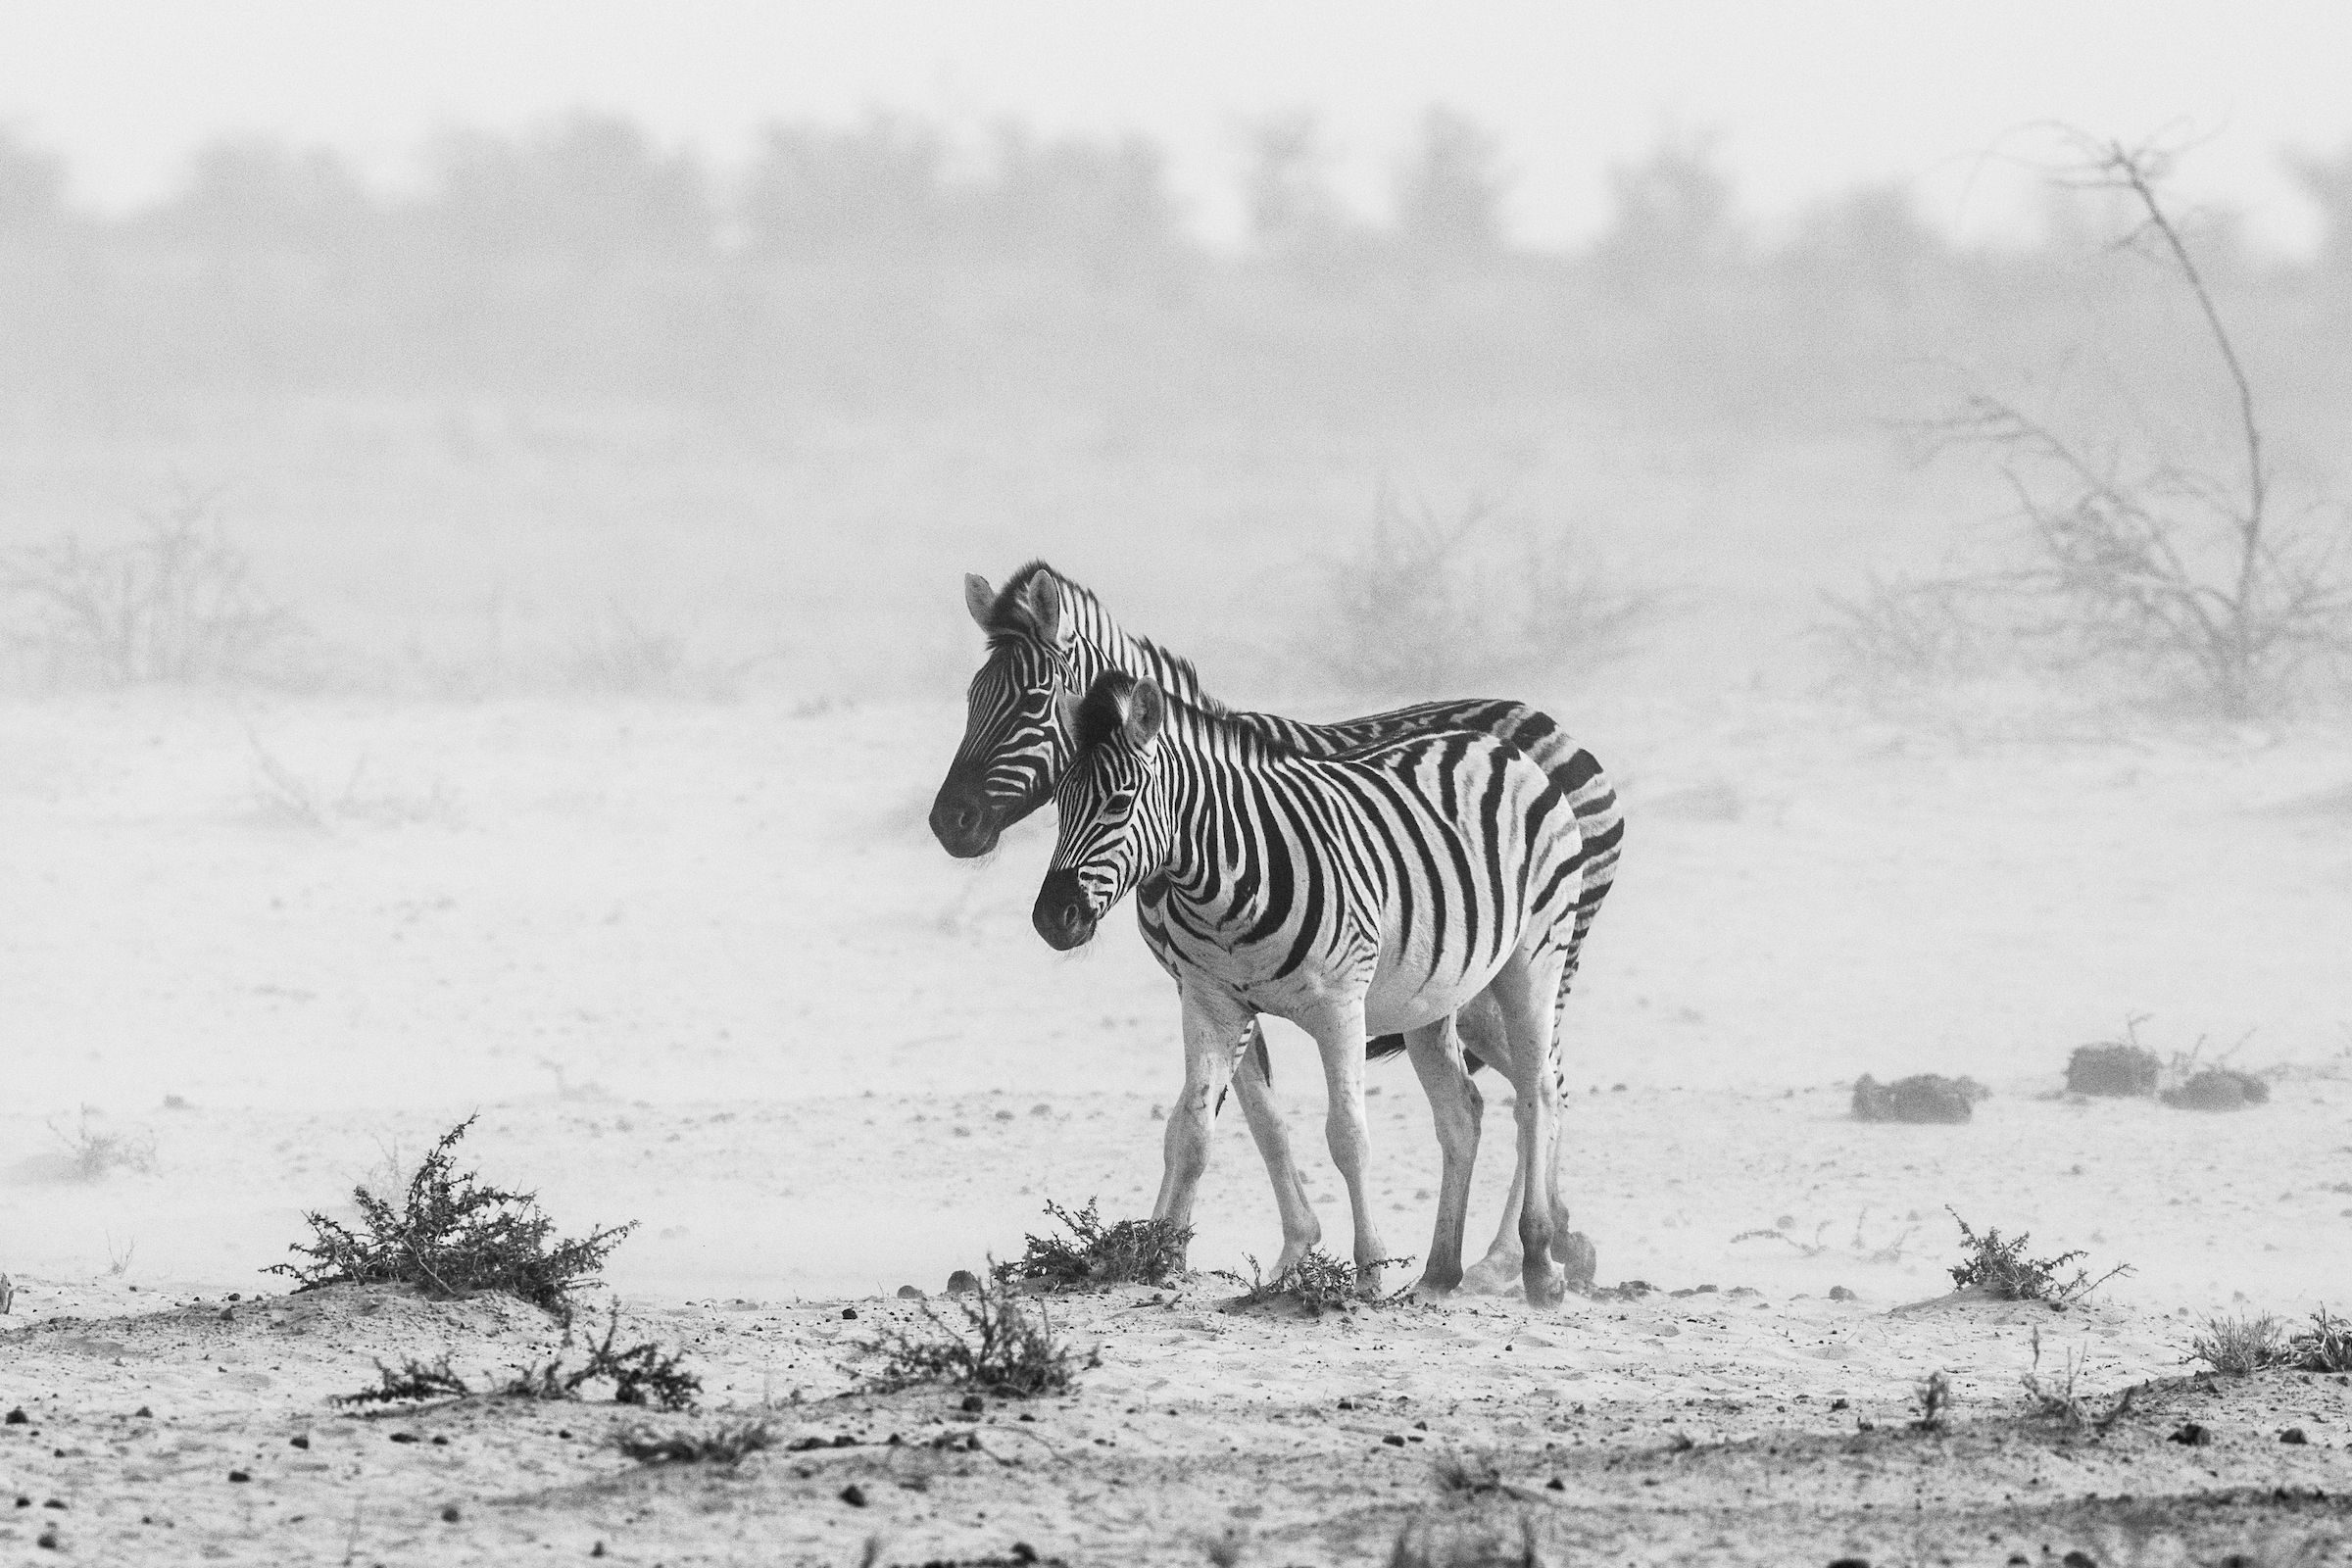 A pair of Burchell's Zebras wait out a dust storm in Etosha during our wildlife photography tour of Namibia